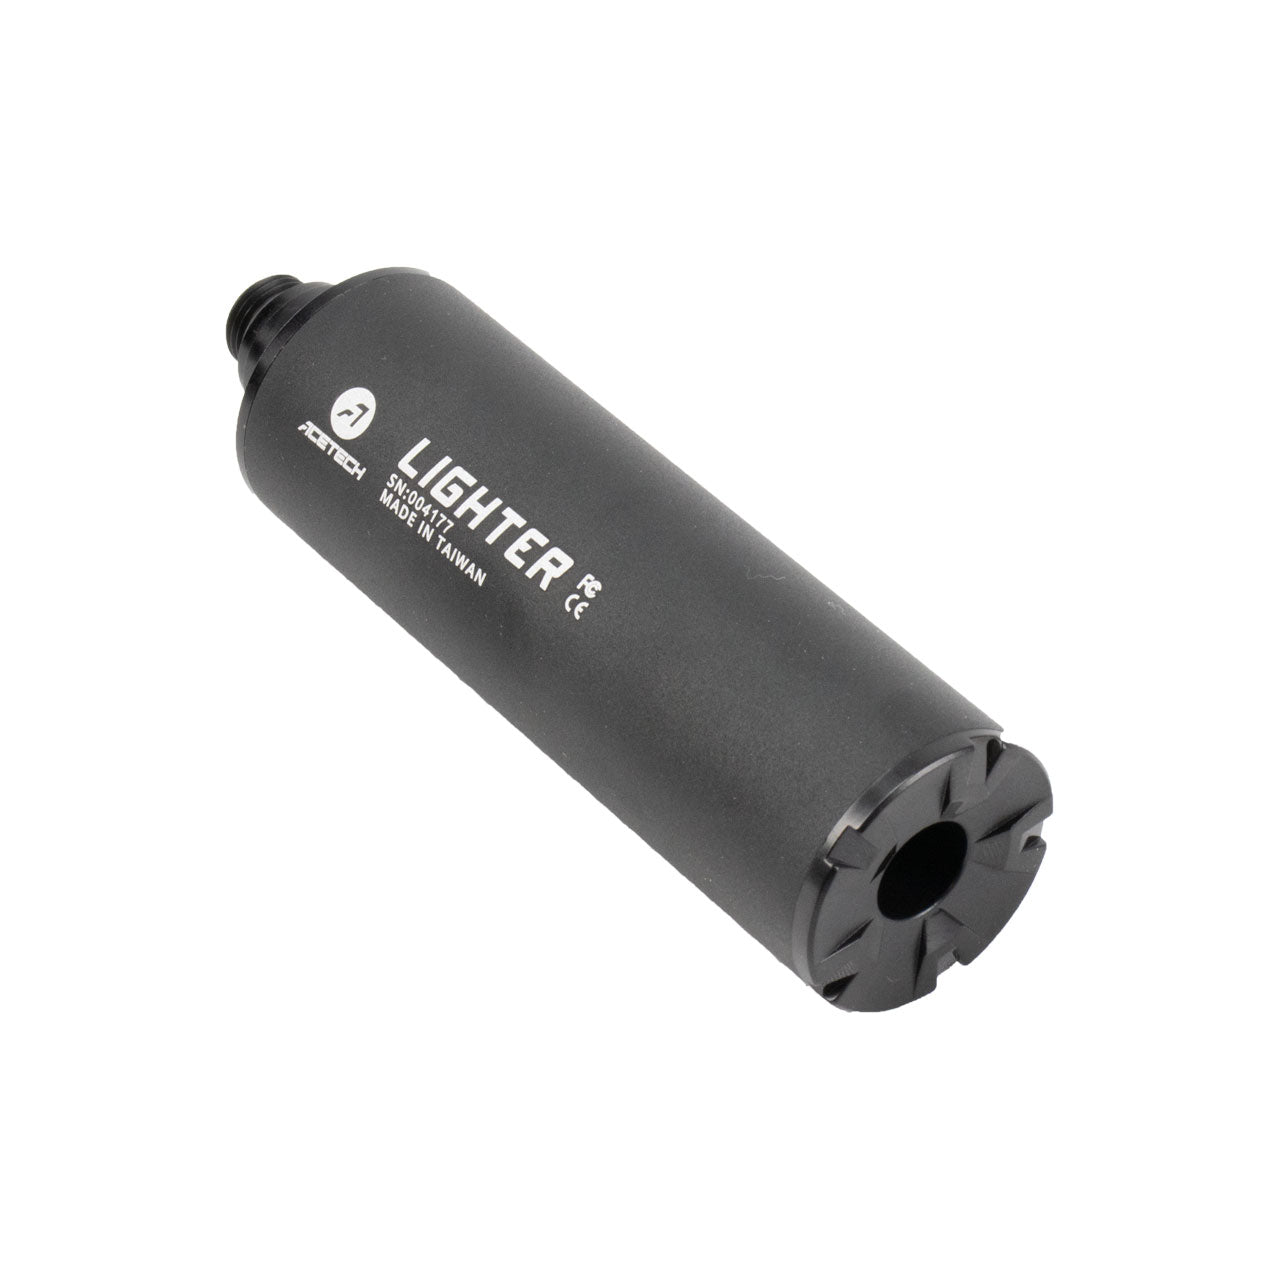 AceTech Lighter Tracer Unit for Airsoft Rifles and Pistols mini